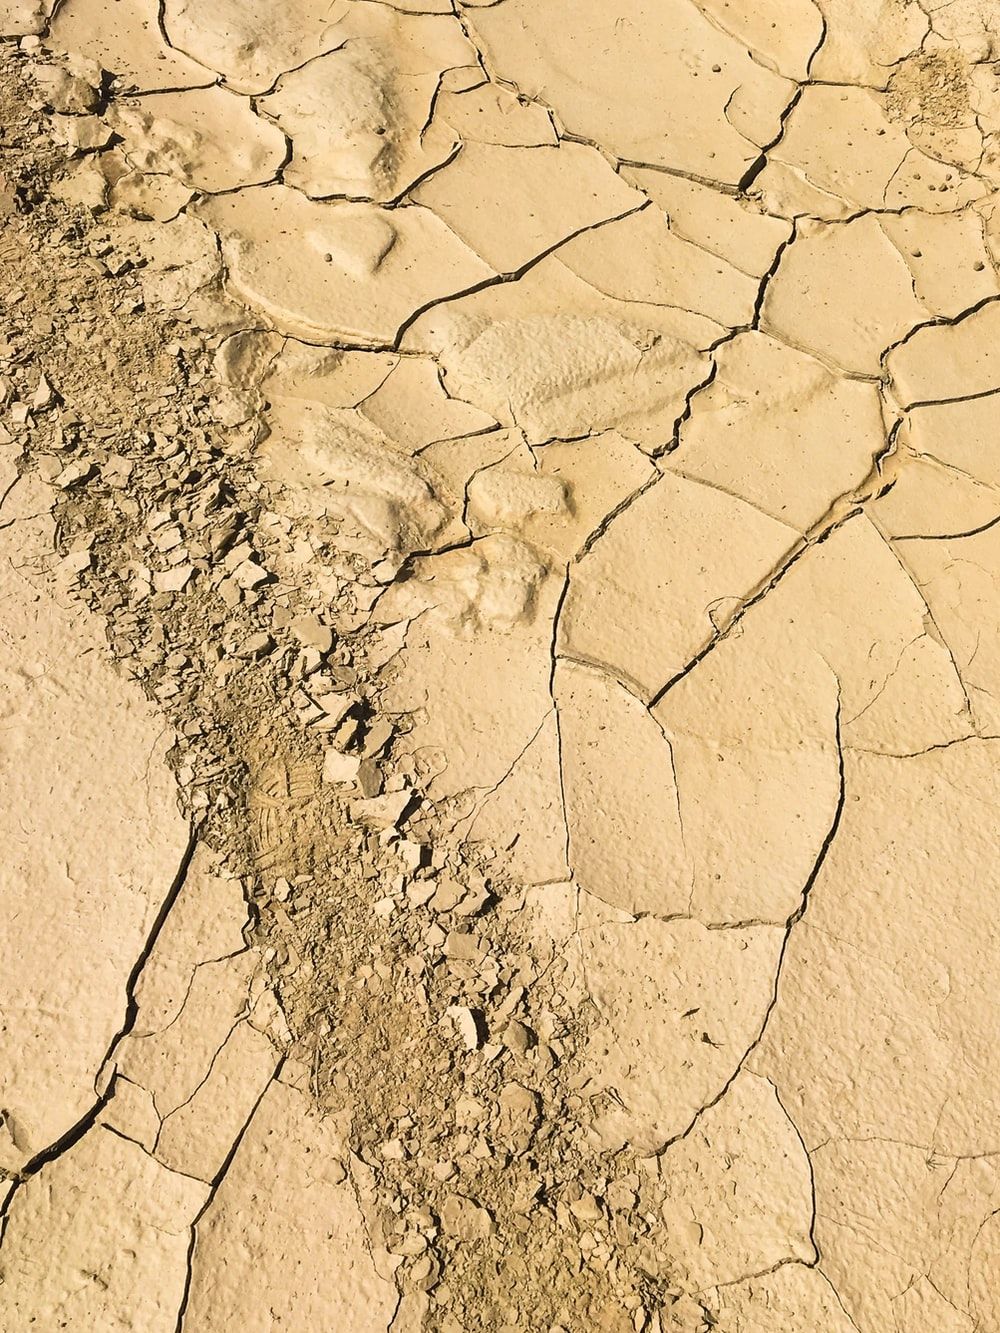 Dry Land Picture. Download Free Image